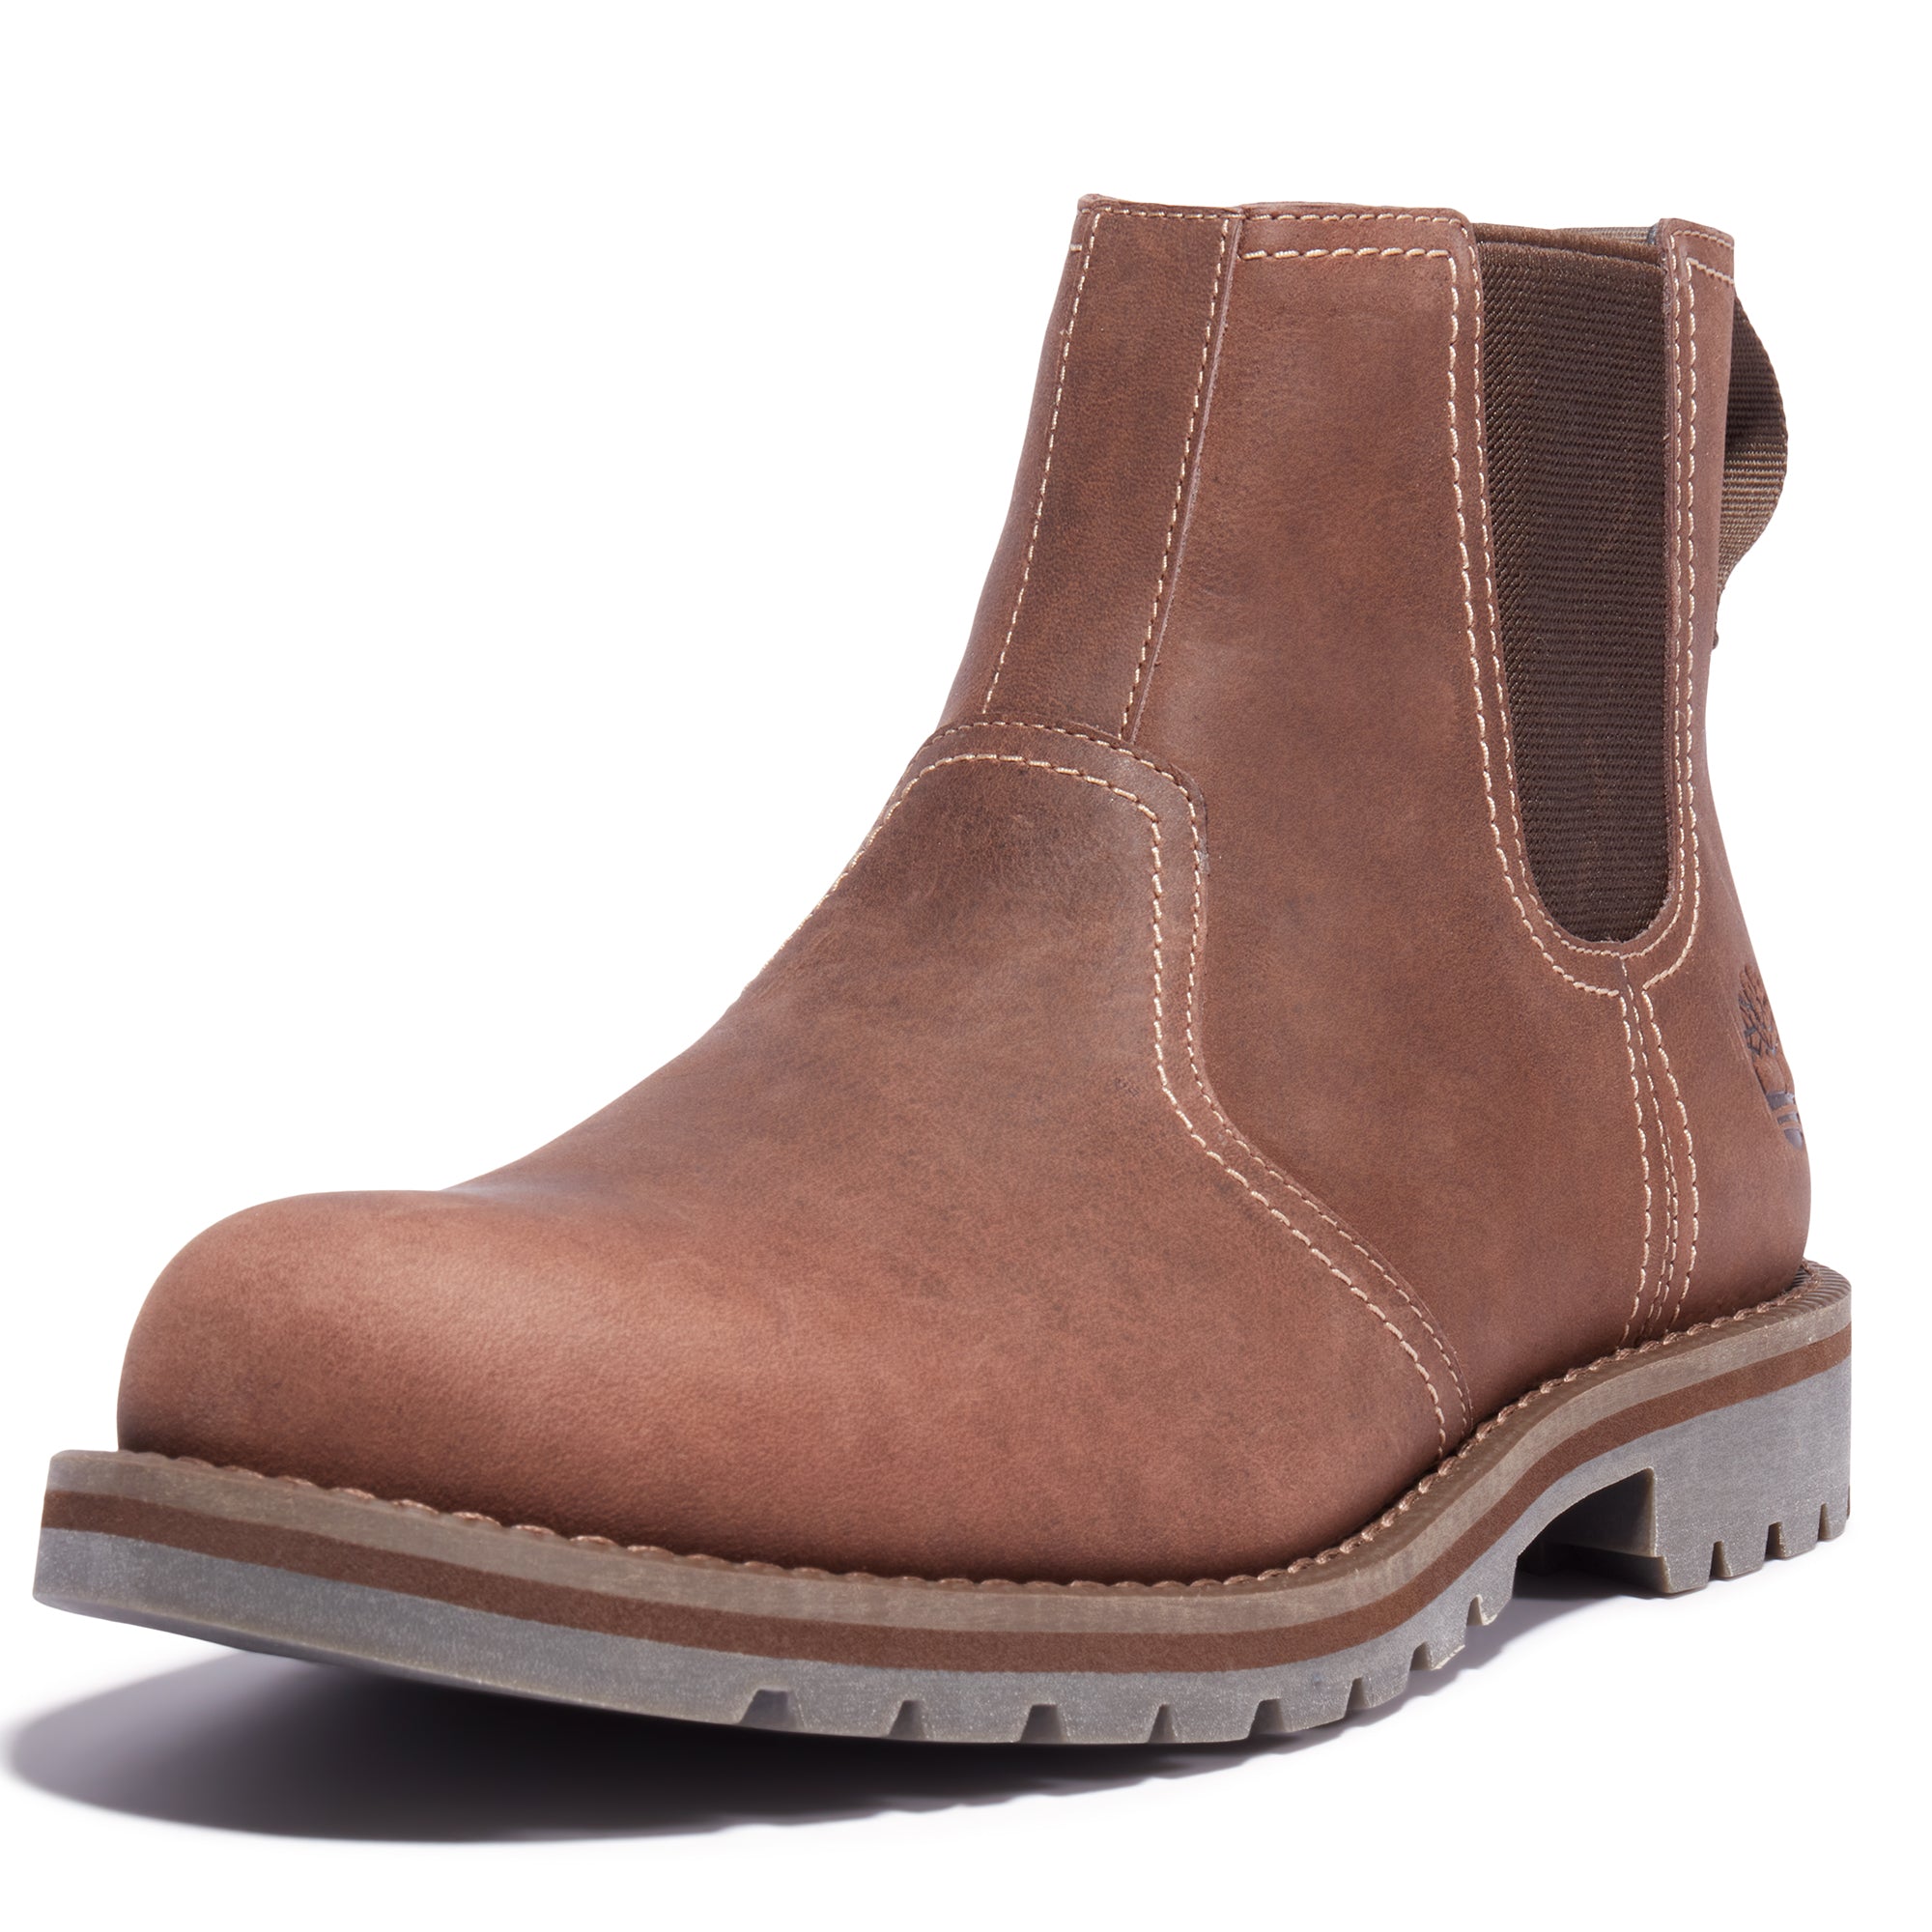 Timberland Larchmont II Chelsea Boot - Mid Brown Full Grain